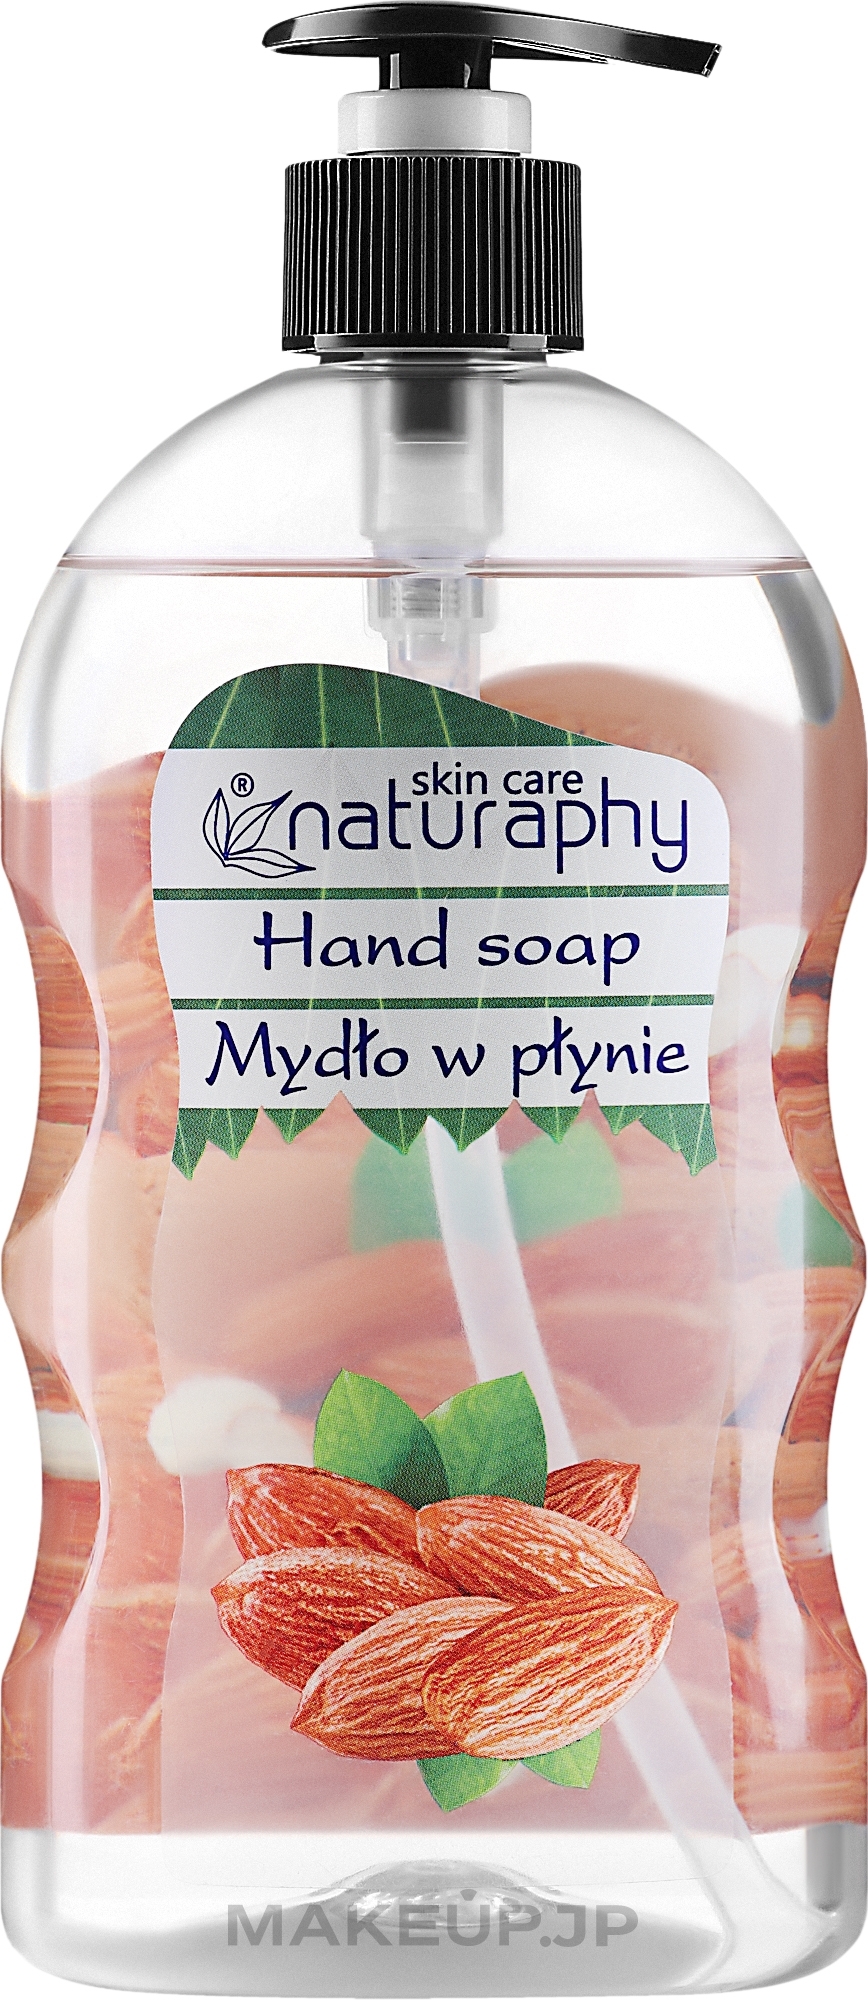 Hand Liquid Soap with Almond Oil - Naturaphy Hand Soap — photo 650 ml